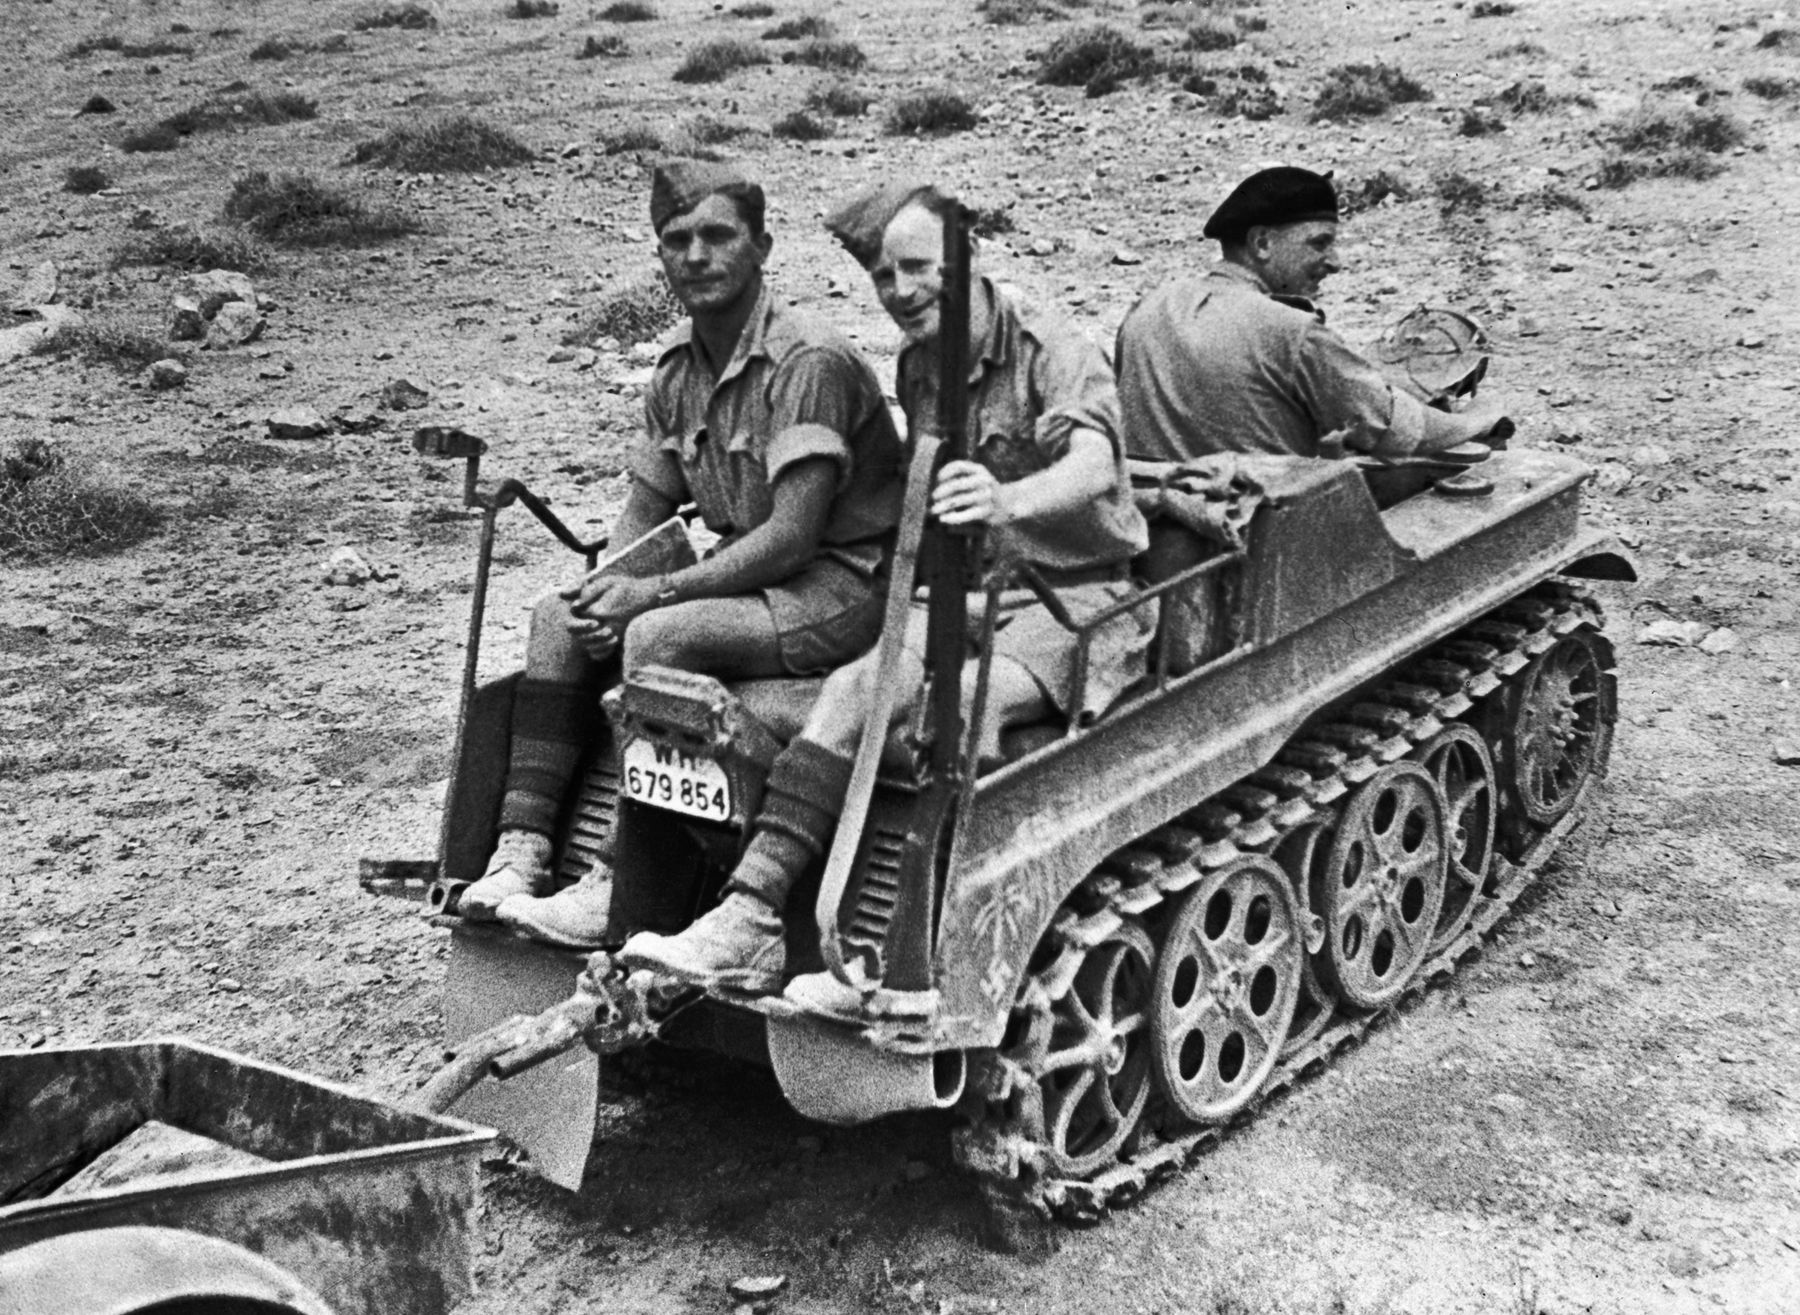 British “desert rats” hop a ride aboard a captured Kettenkrad during the North Africa campaign in June 1942. The versatile German vehicle also saw service on the Eastern Front.